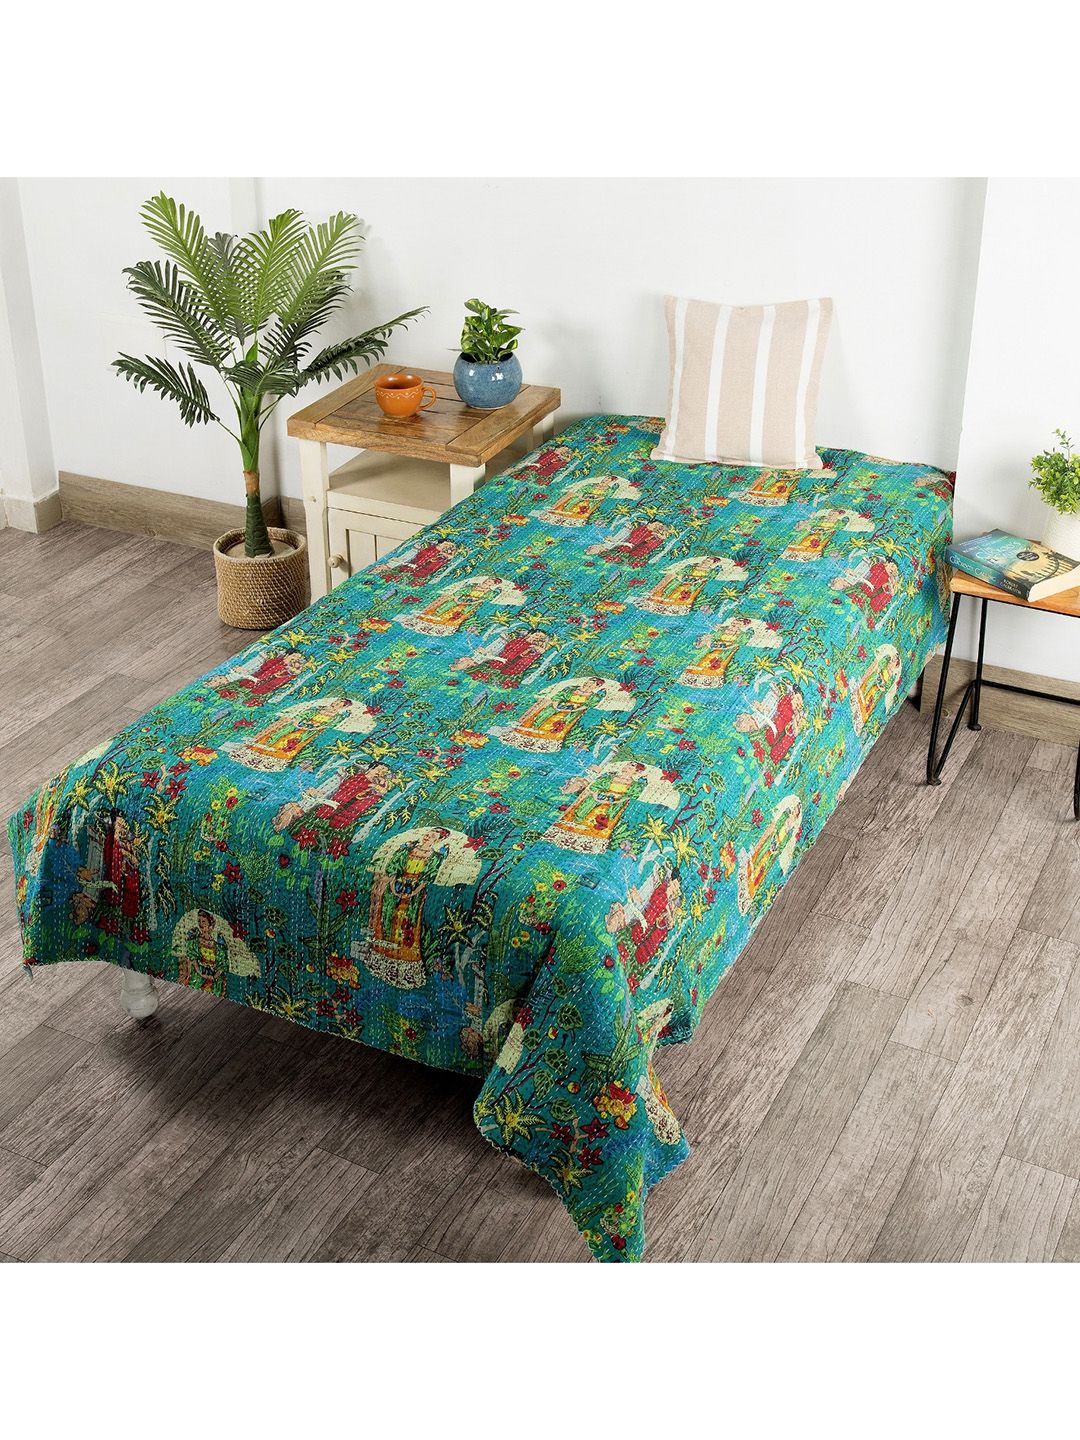 HANDICRAFT PALACE Green Frida Kahlo Printed Kantha Quilted Cotton Single Bed Cover Price in India